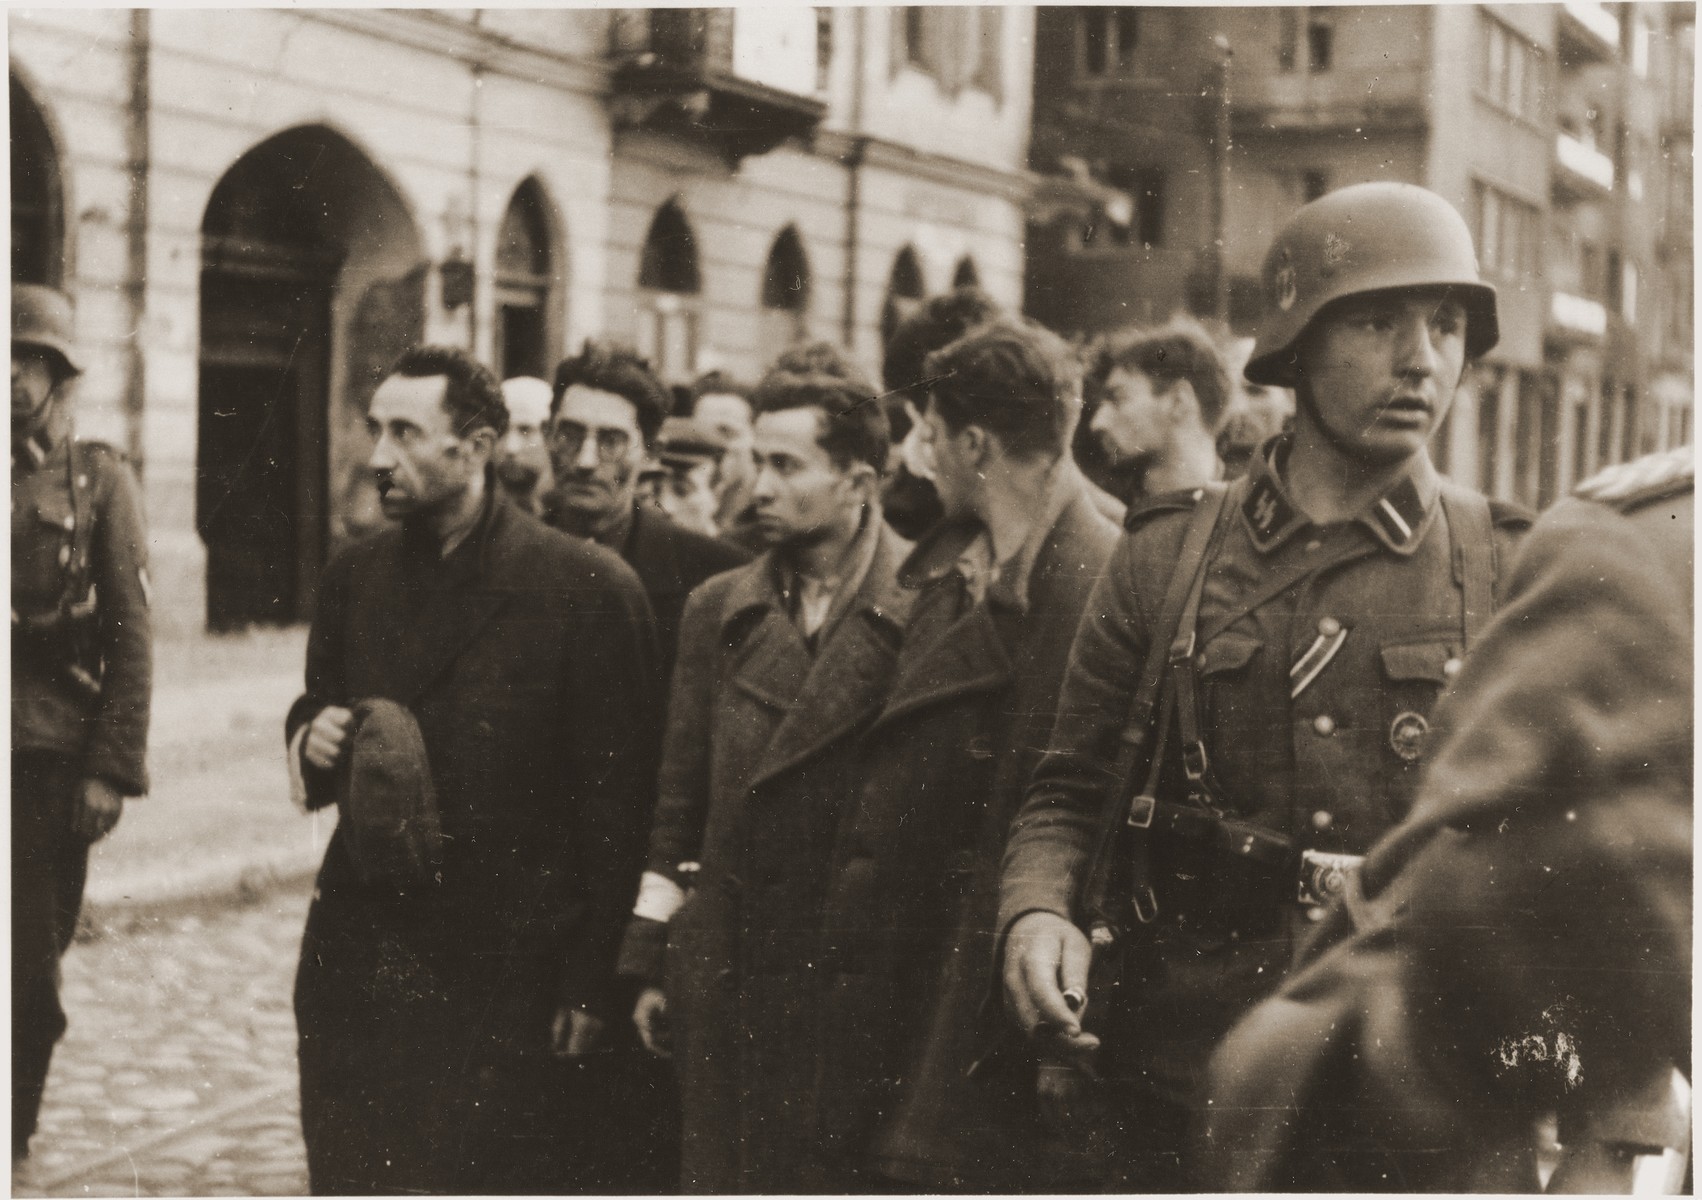 SS troops guard members of the Jewish resistance captured during the suppression of the Warsaw ghetto uprising.  

The original caption (translated from German) reads: "Bandits!"